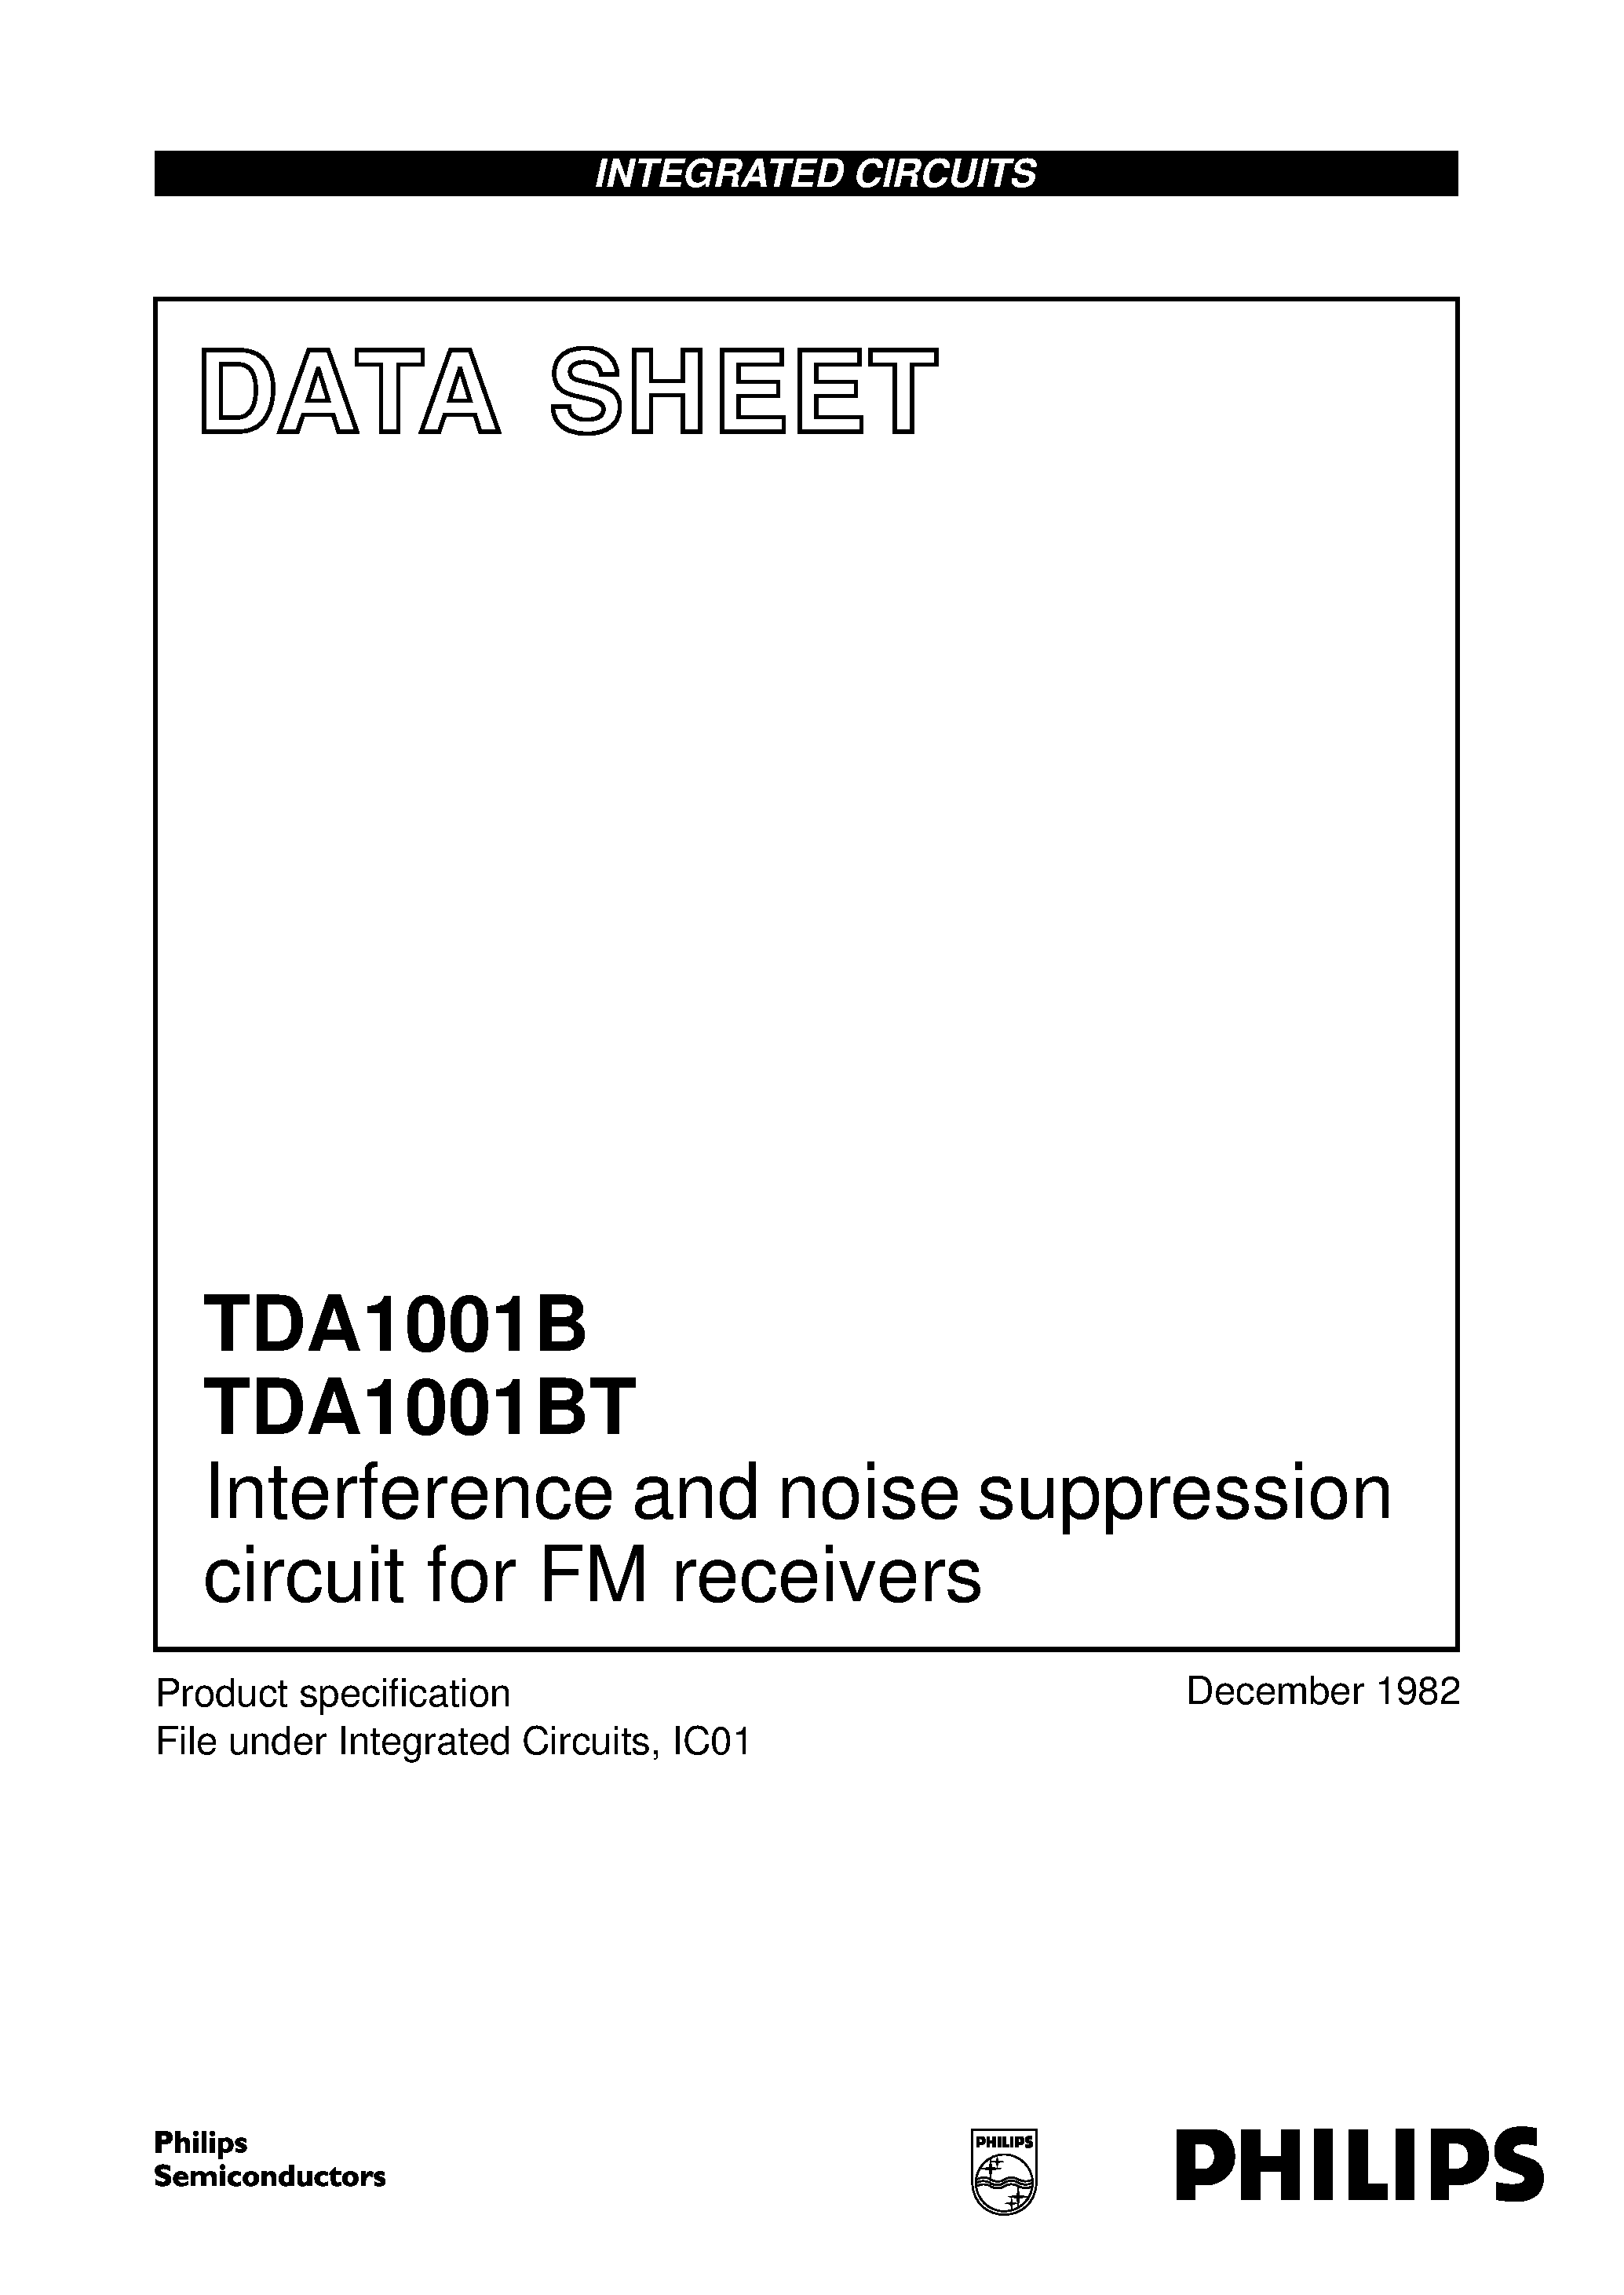 Datasheet TDA1001B - Interference and noise suppression circuit for FM receivers page 1